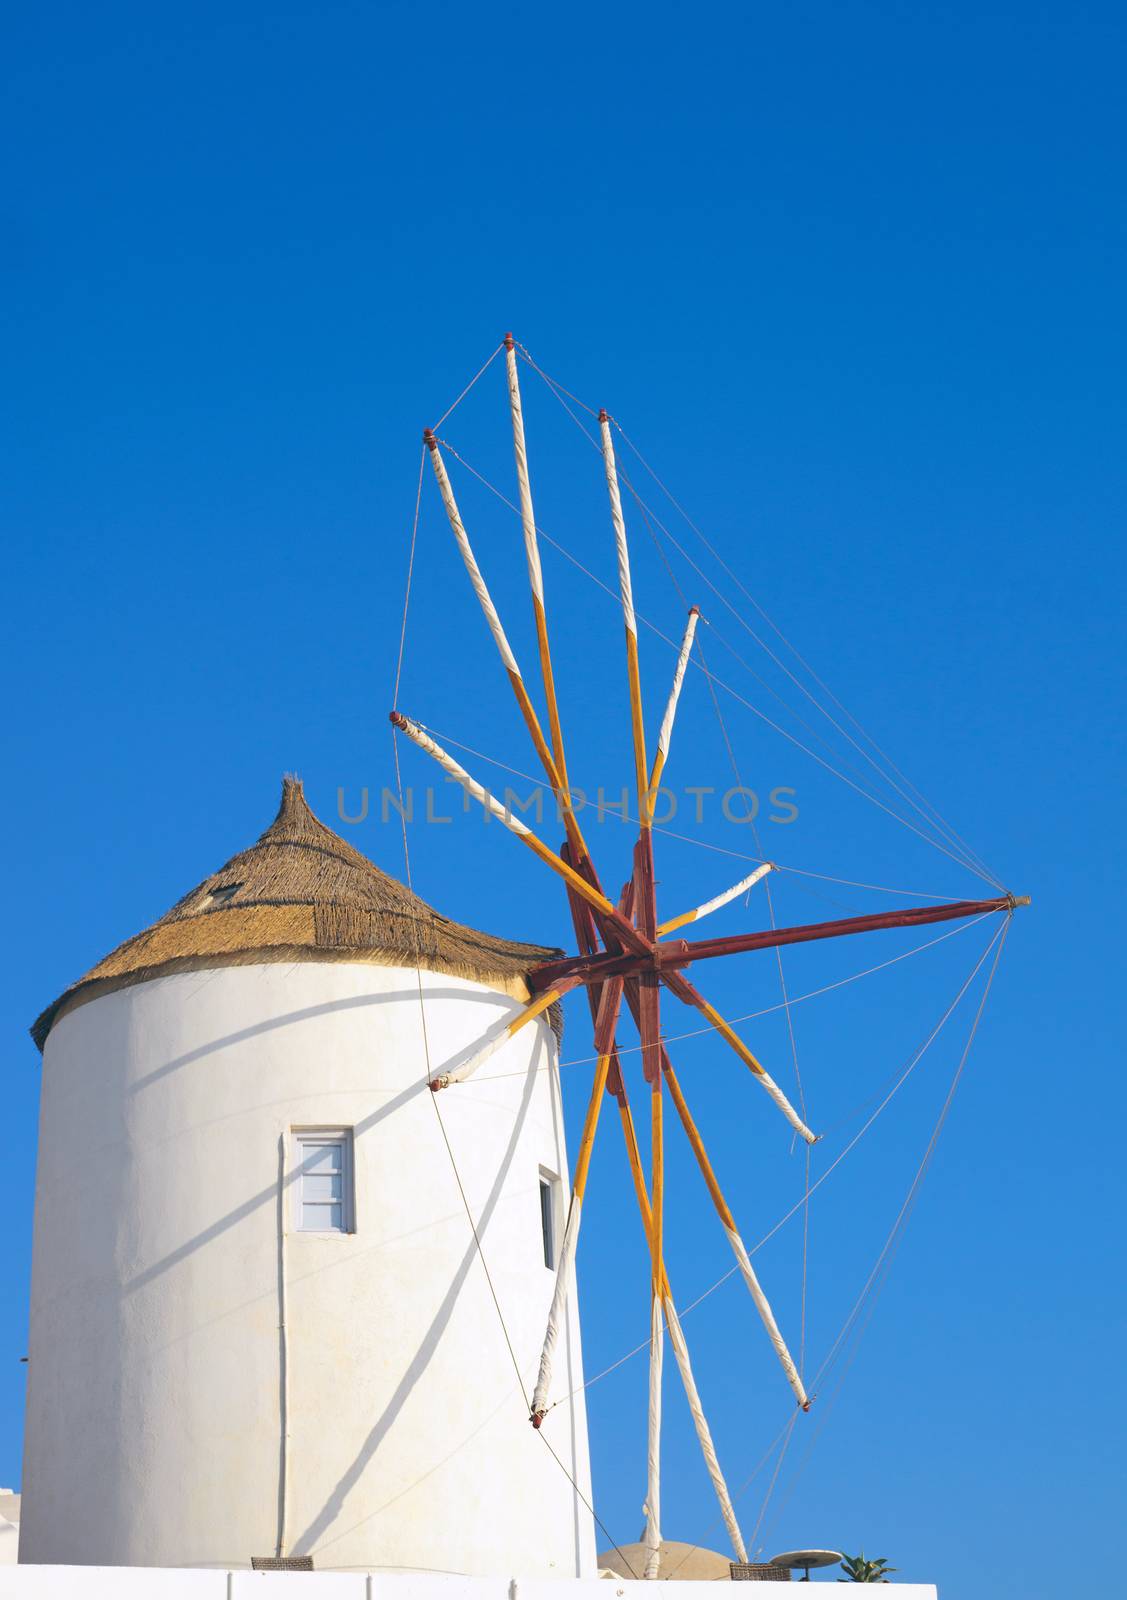 A traditional windmill seen on a cyclades island in Greece